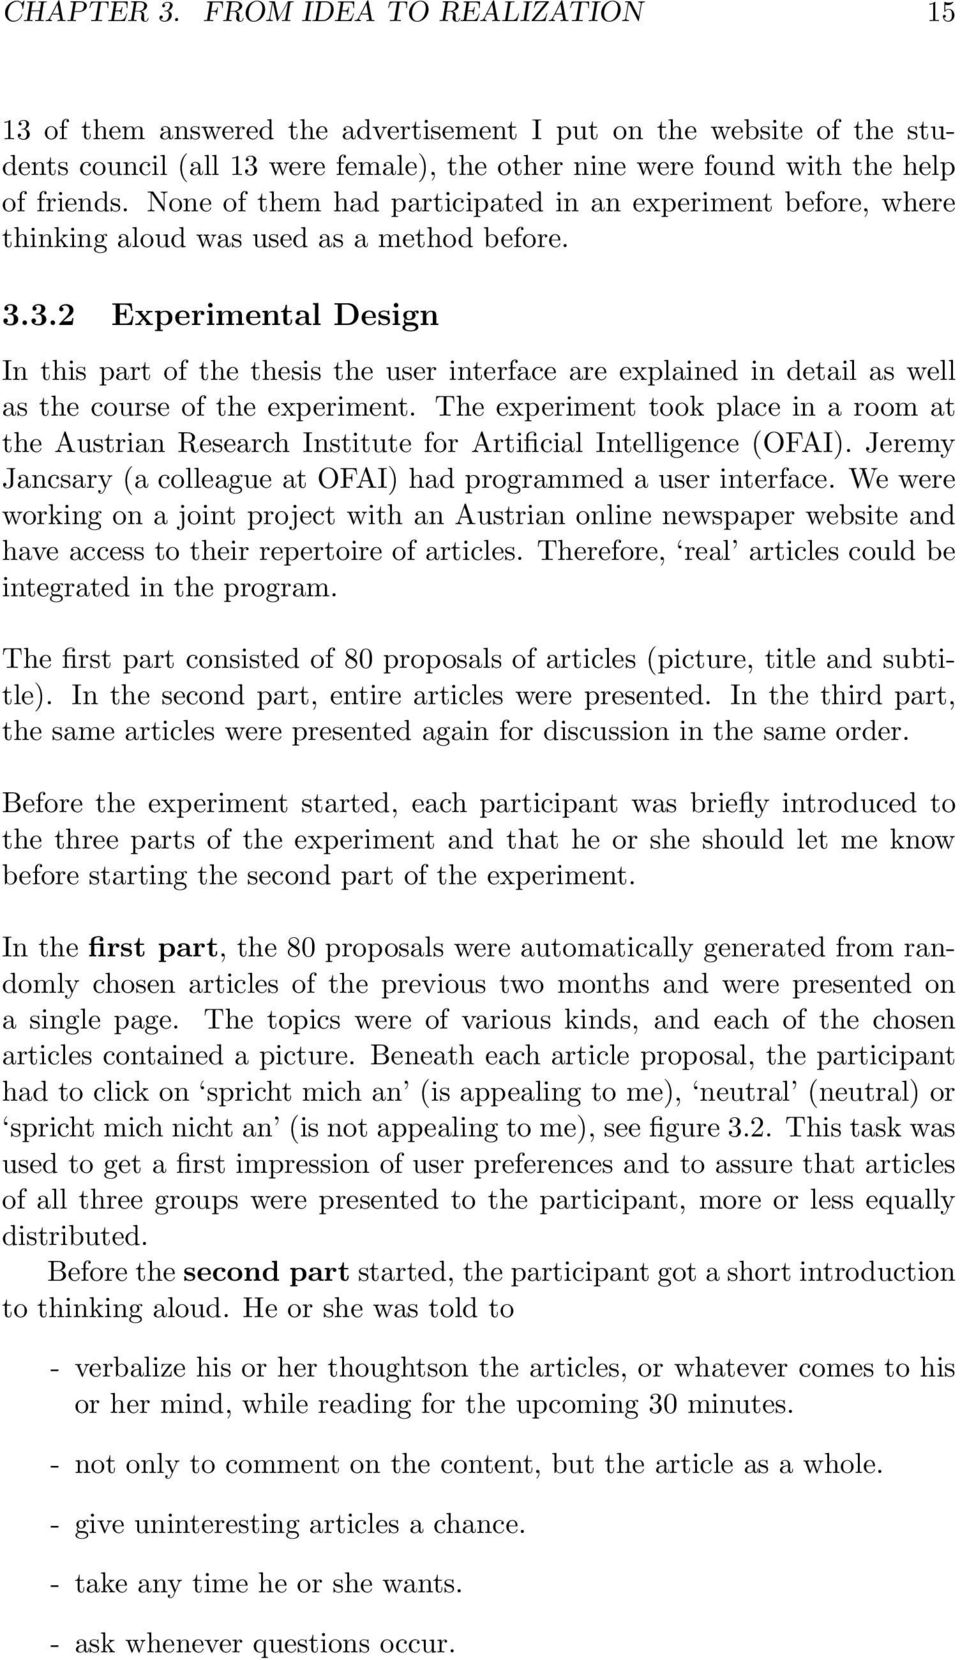 3.2 Experimental Design In this part of the thesis the user interface are explained in detail as well as the course of the experiment.